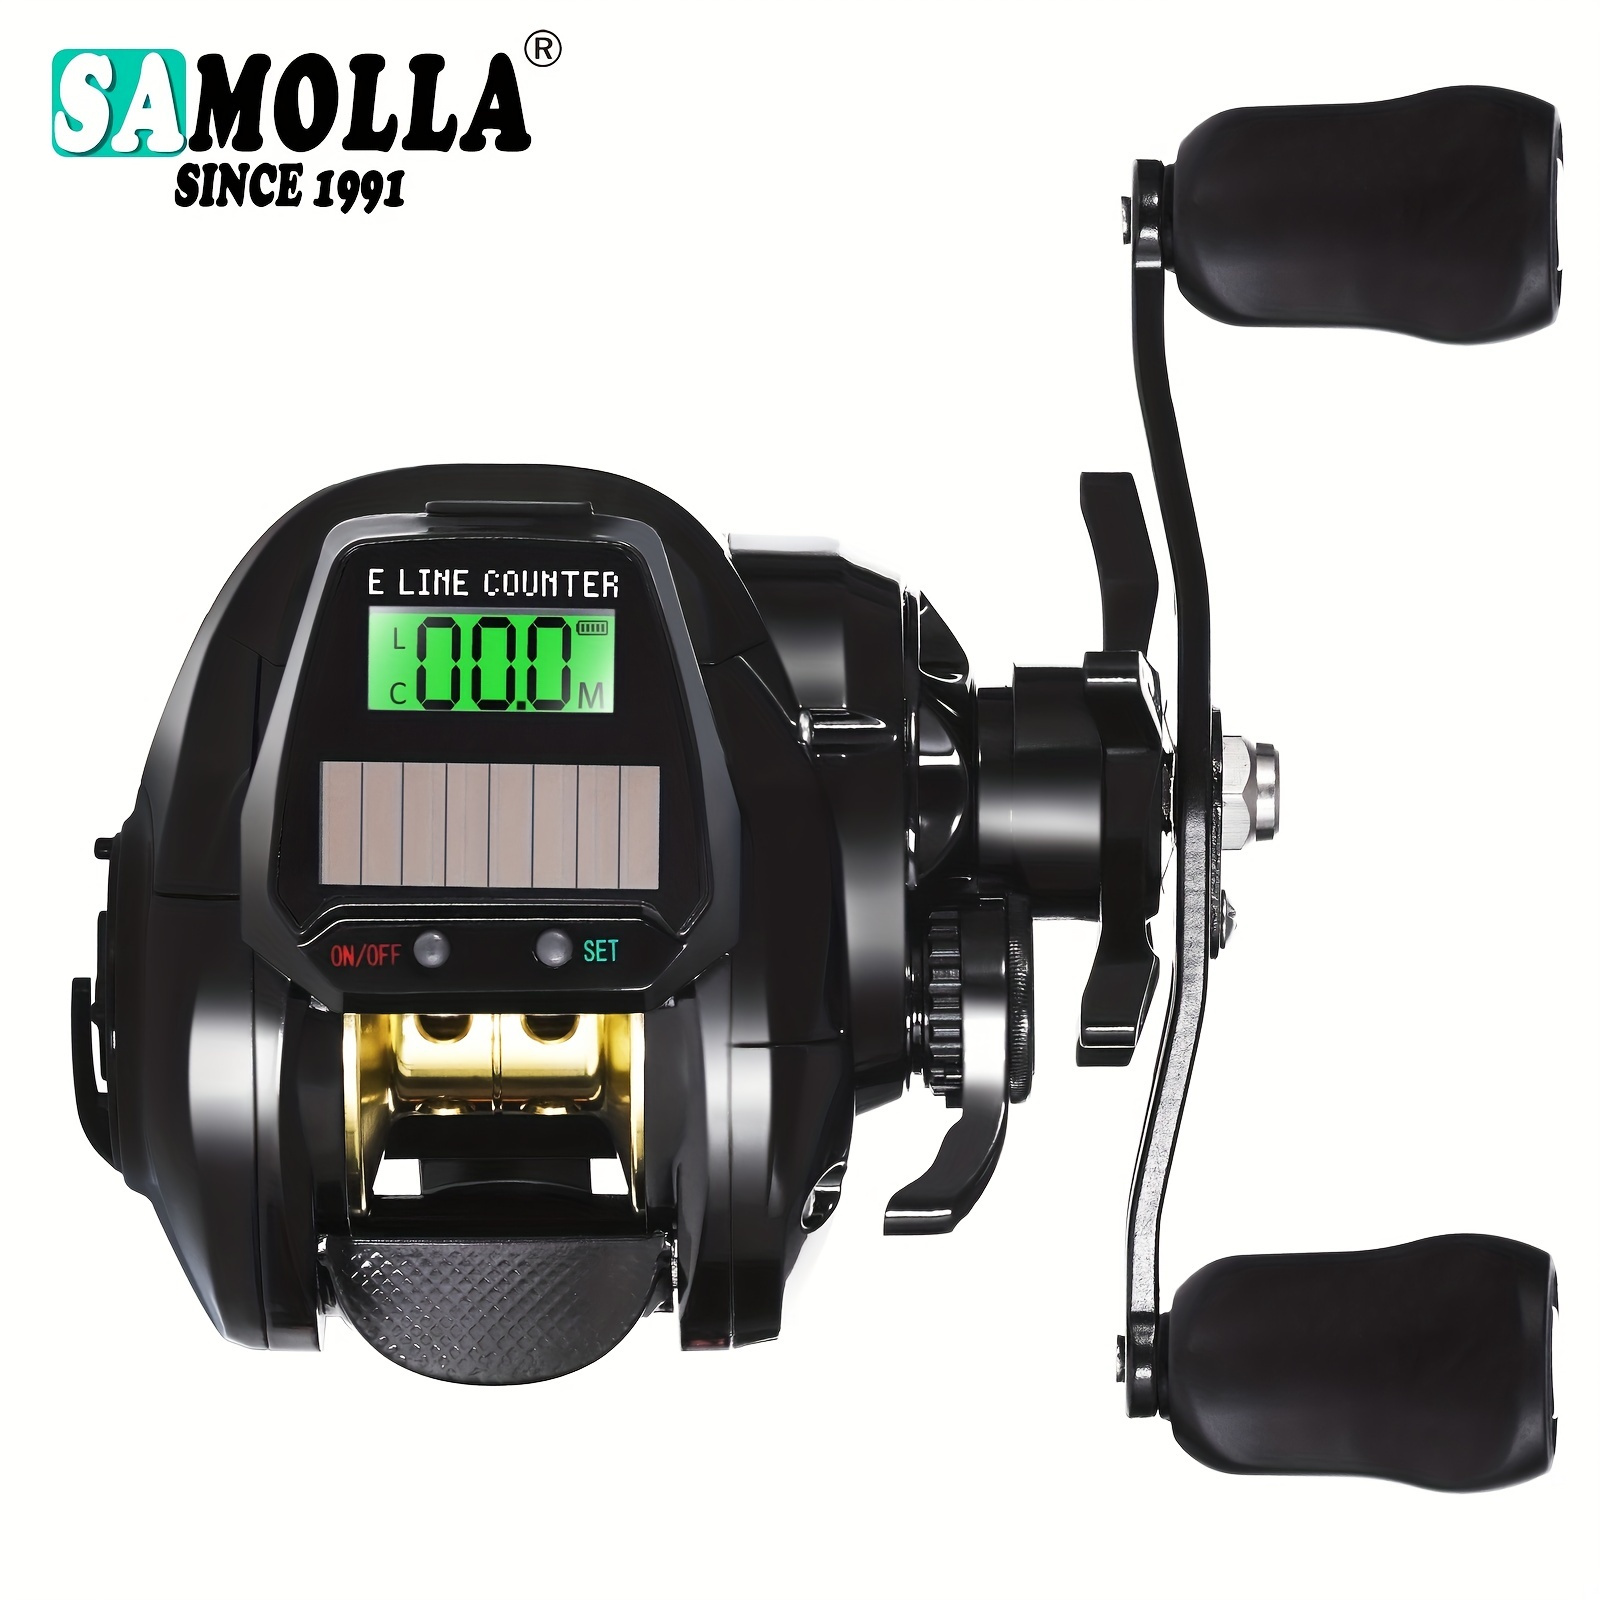 

Electronic Baitcasting Fishing Reel: Variable Speed Adjustment, Saltwater Waterproof Design For Maximum Casting Performance!